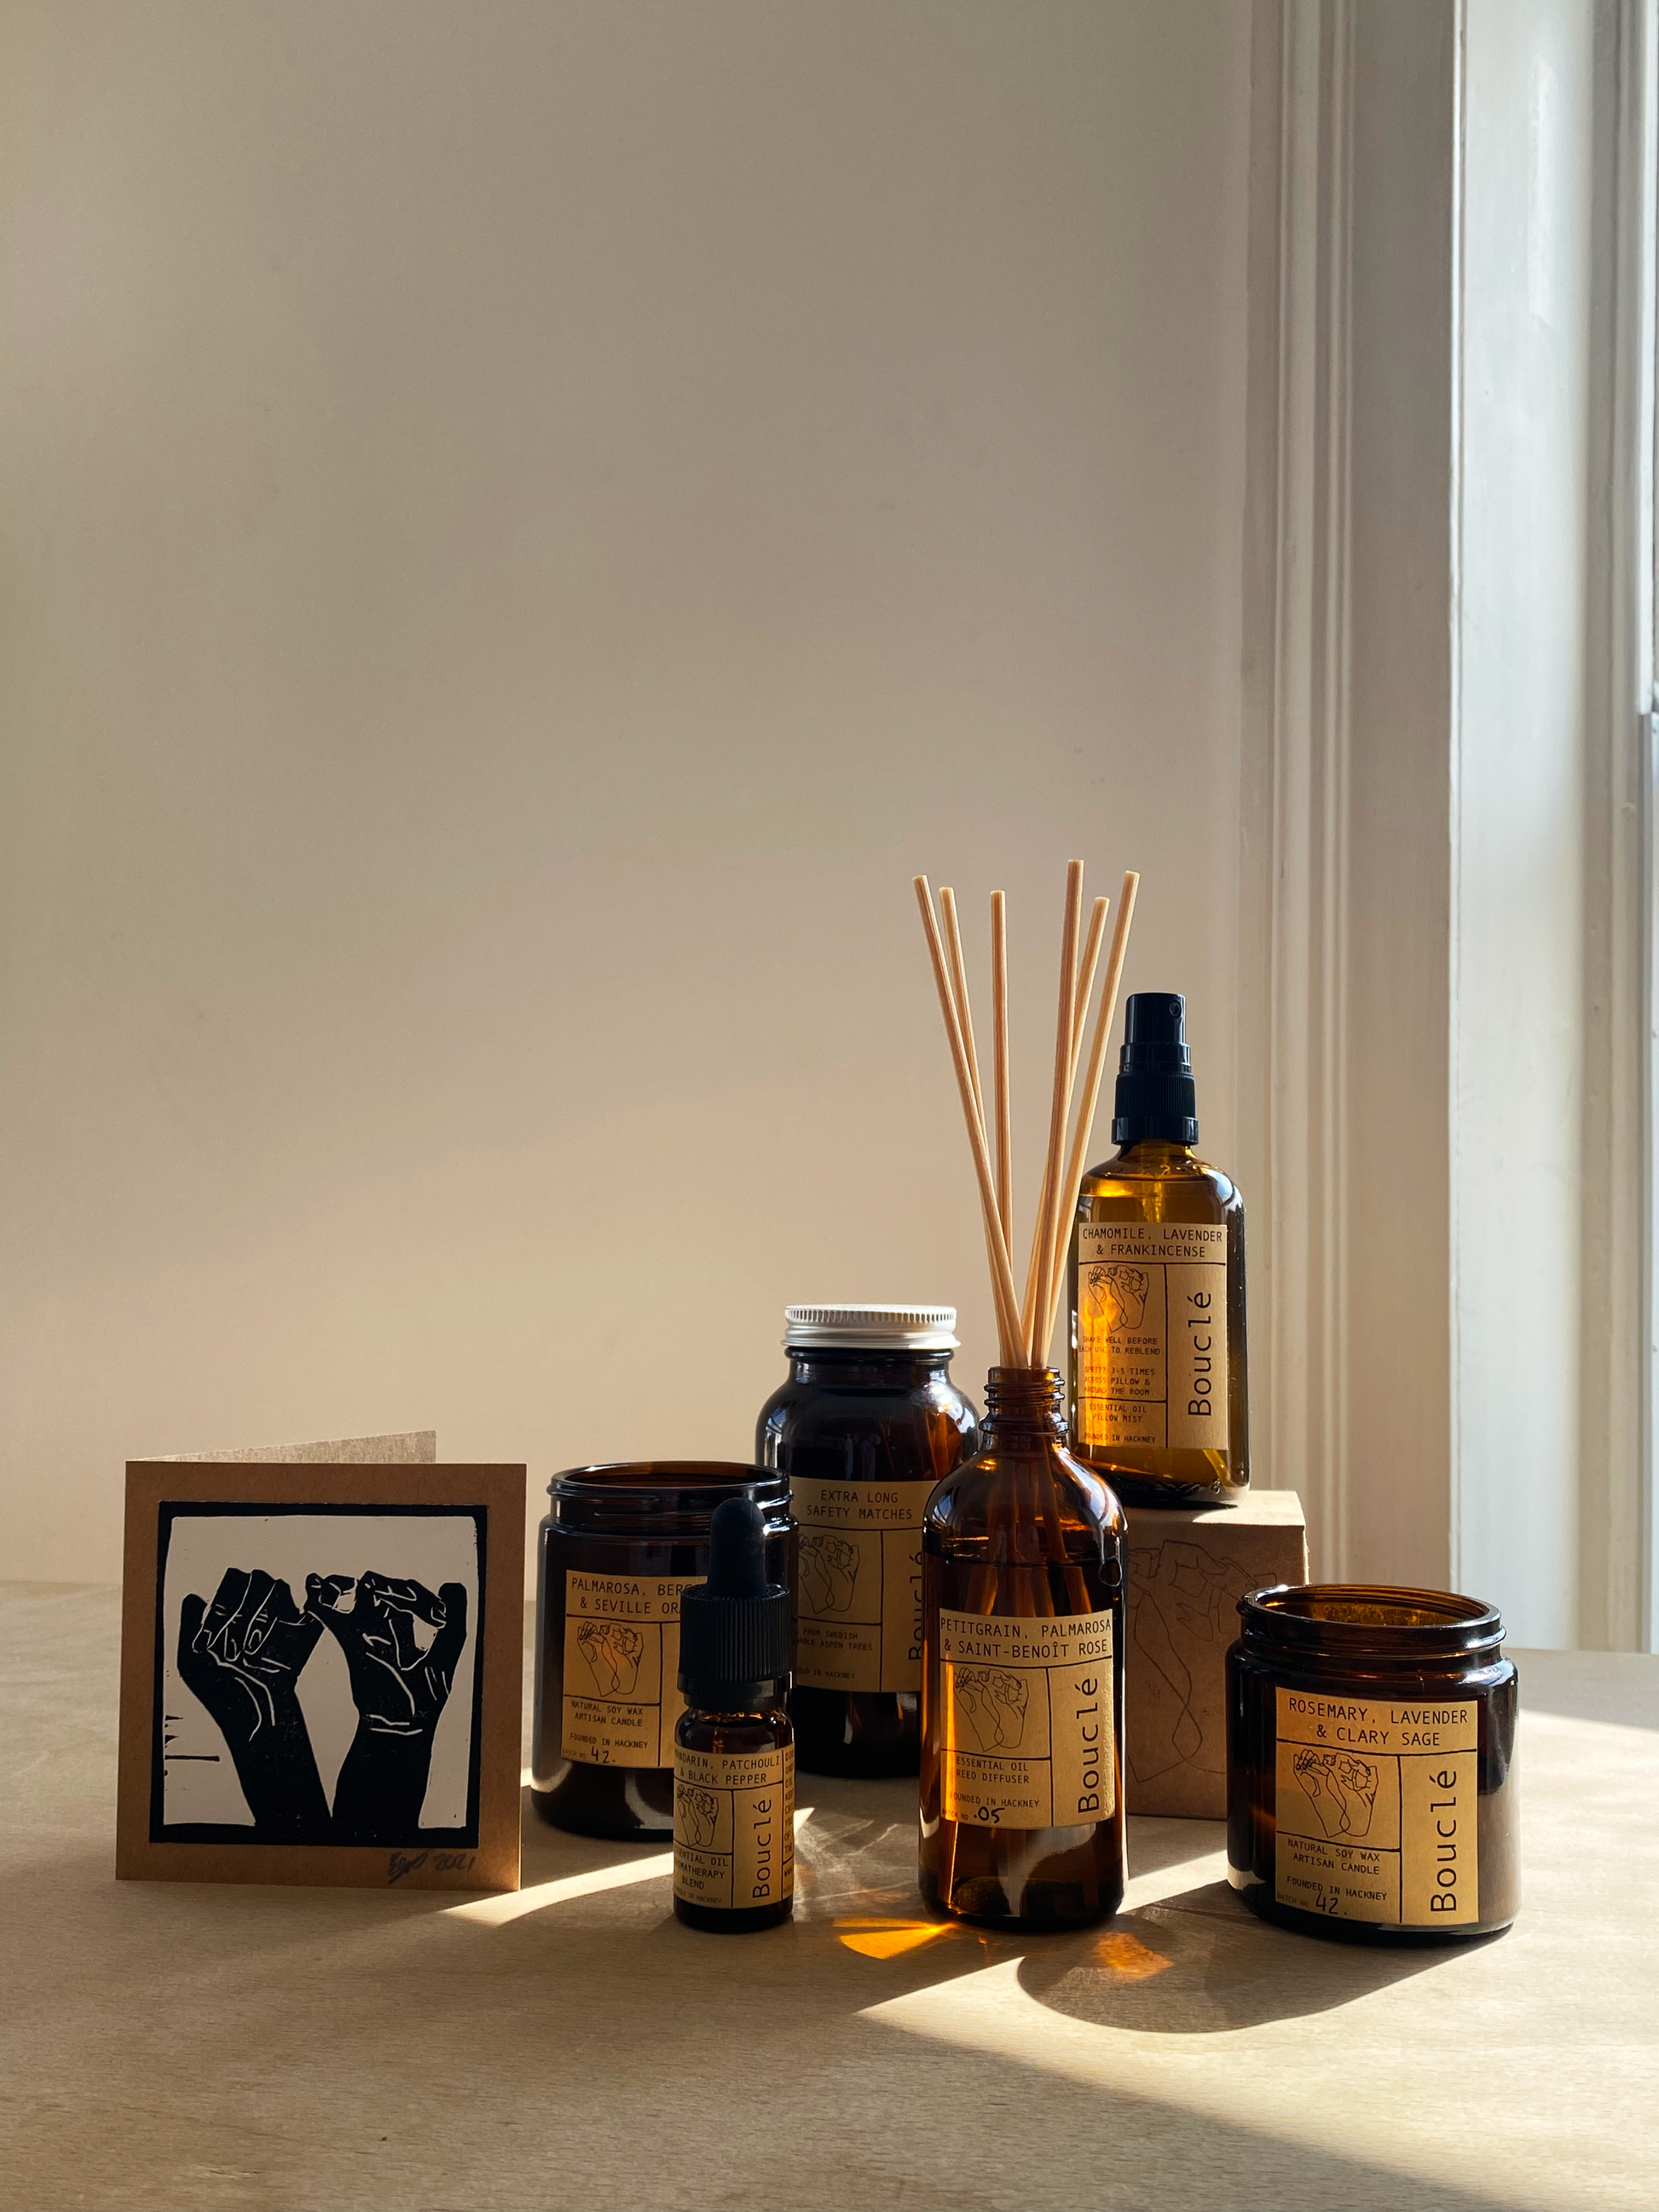 Selection of Bouclé London handpoured essential oil products in amber glass apothecary jars including soy wax candles, rattan reed diffusers, room sprays and essential oil aromatherapy blends.